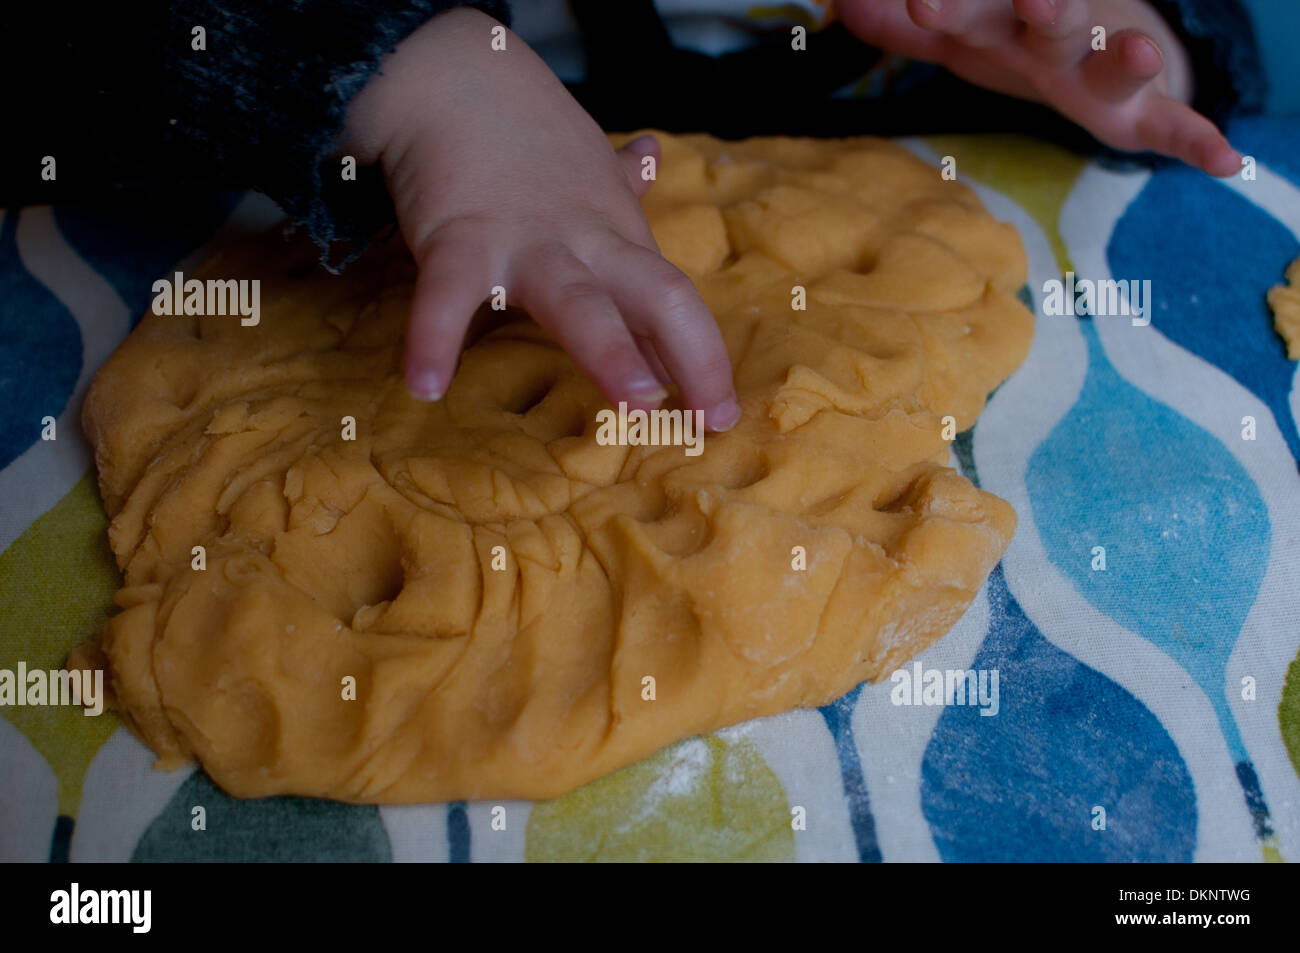 Toddler playing with home-made play dough Stock Photo